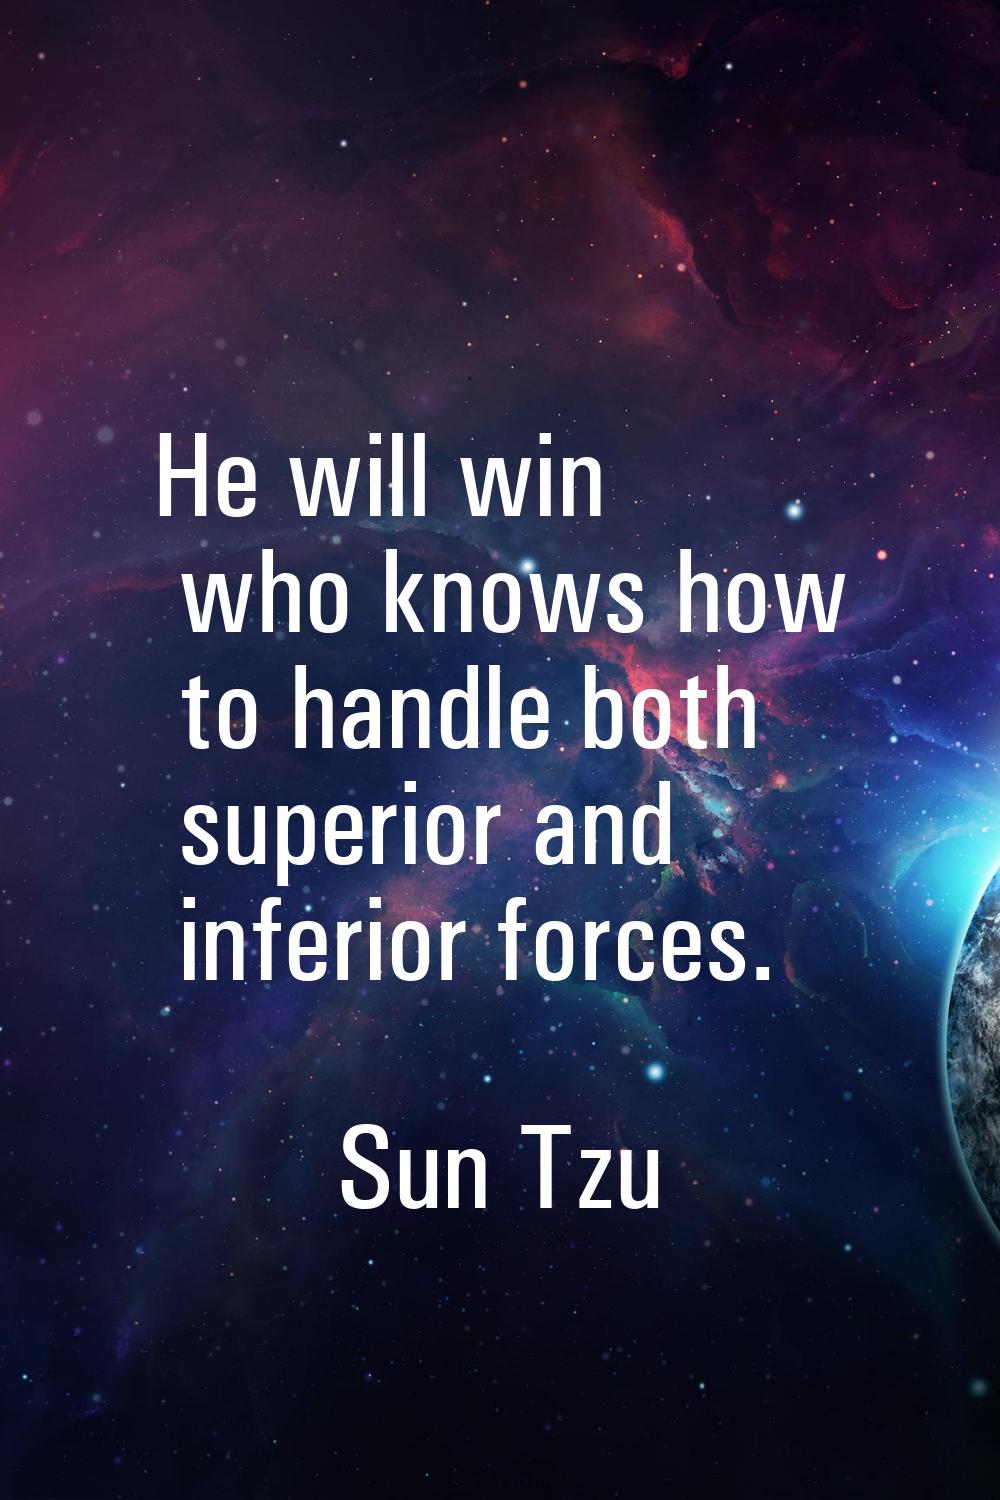 He will win who knows how to handle both superior and inferior forces.